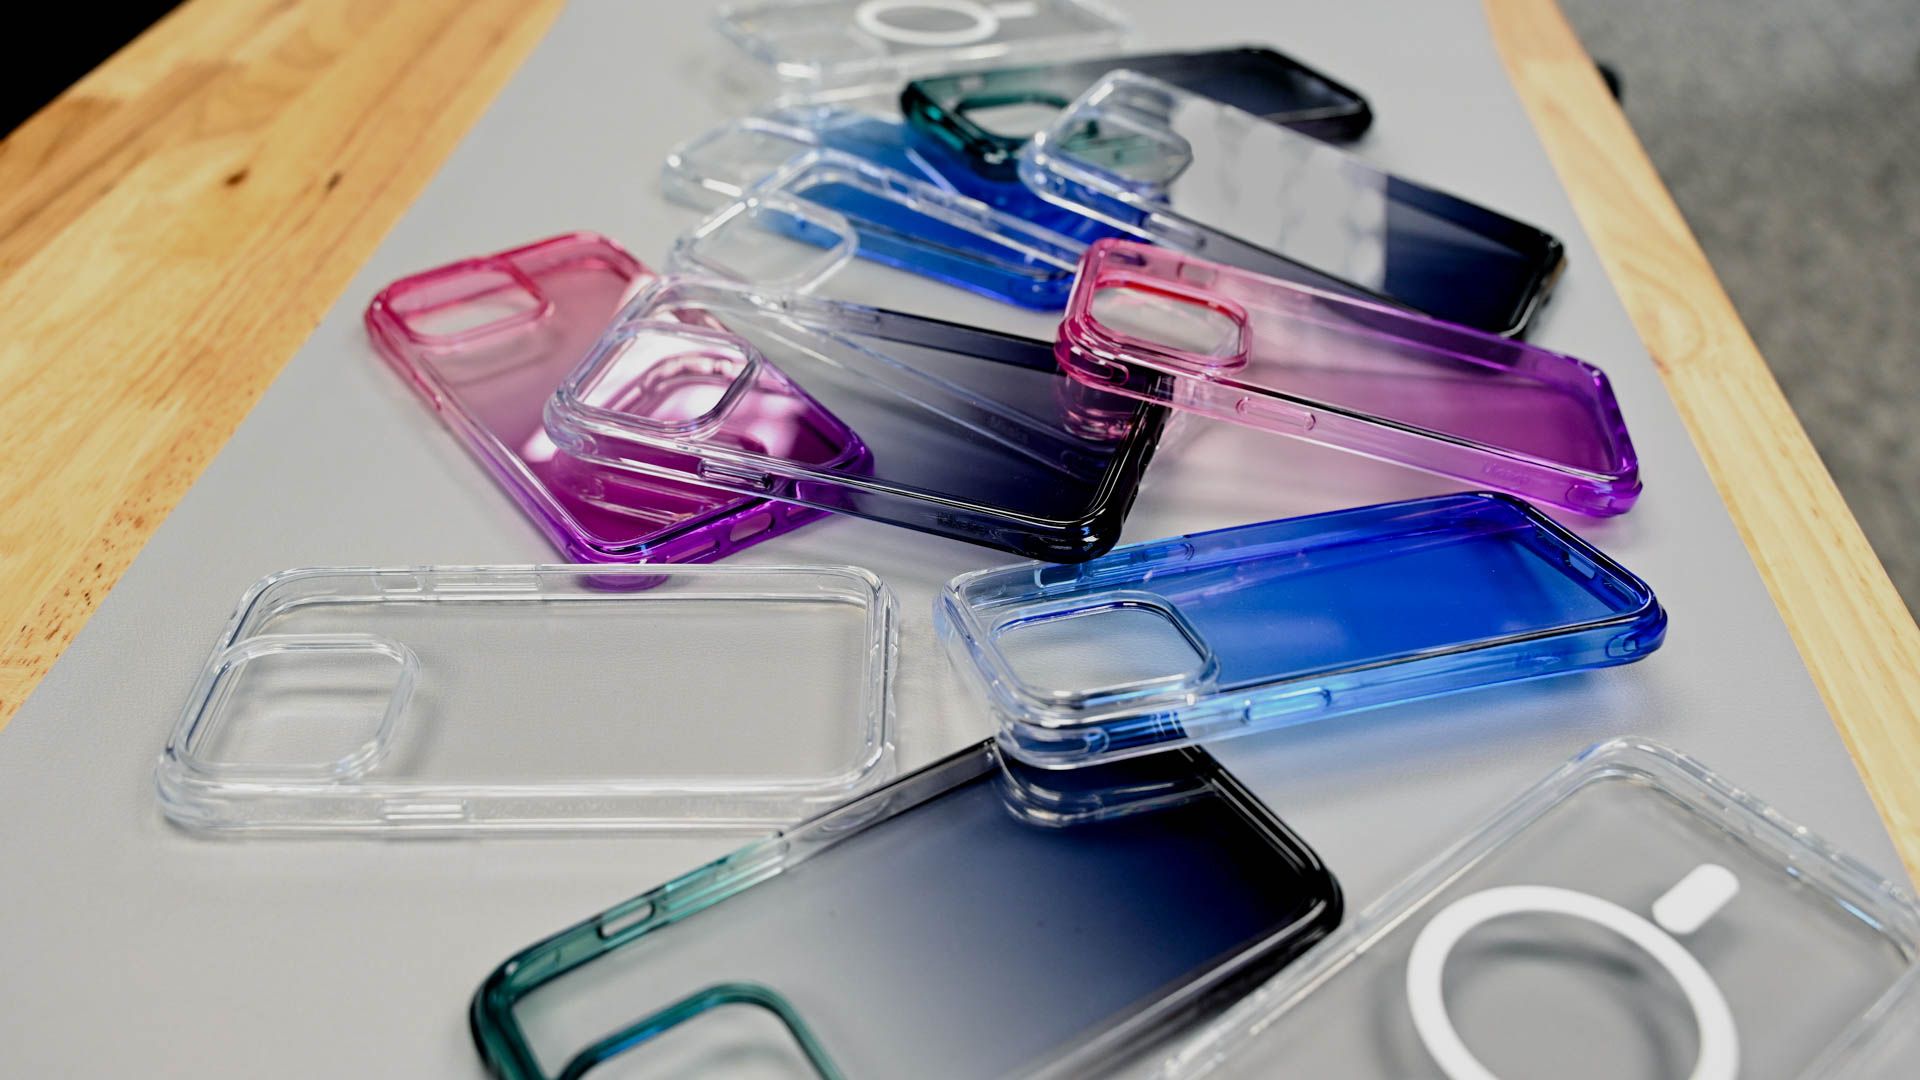 Phone cases in a pile